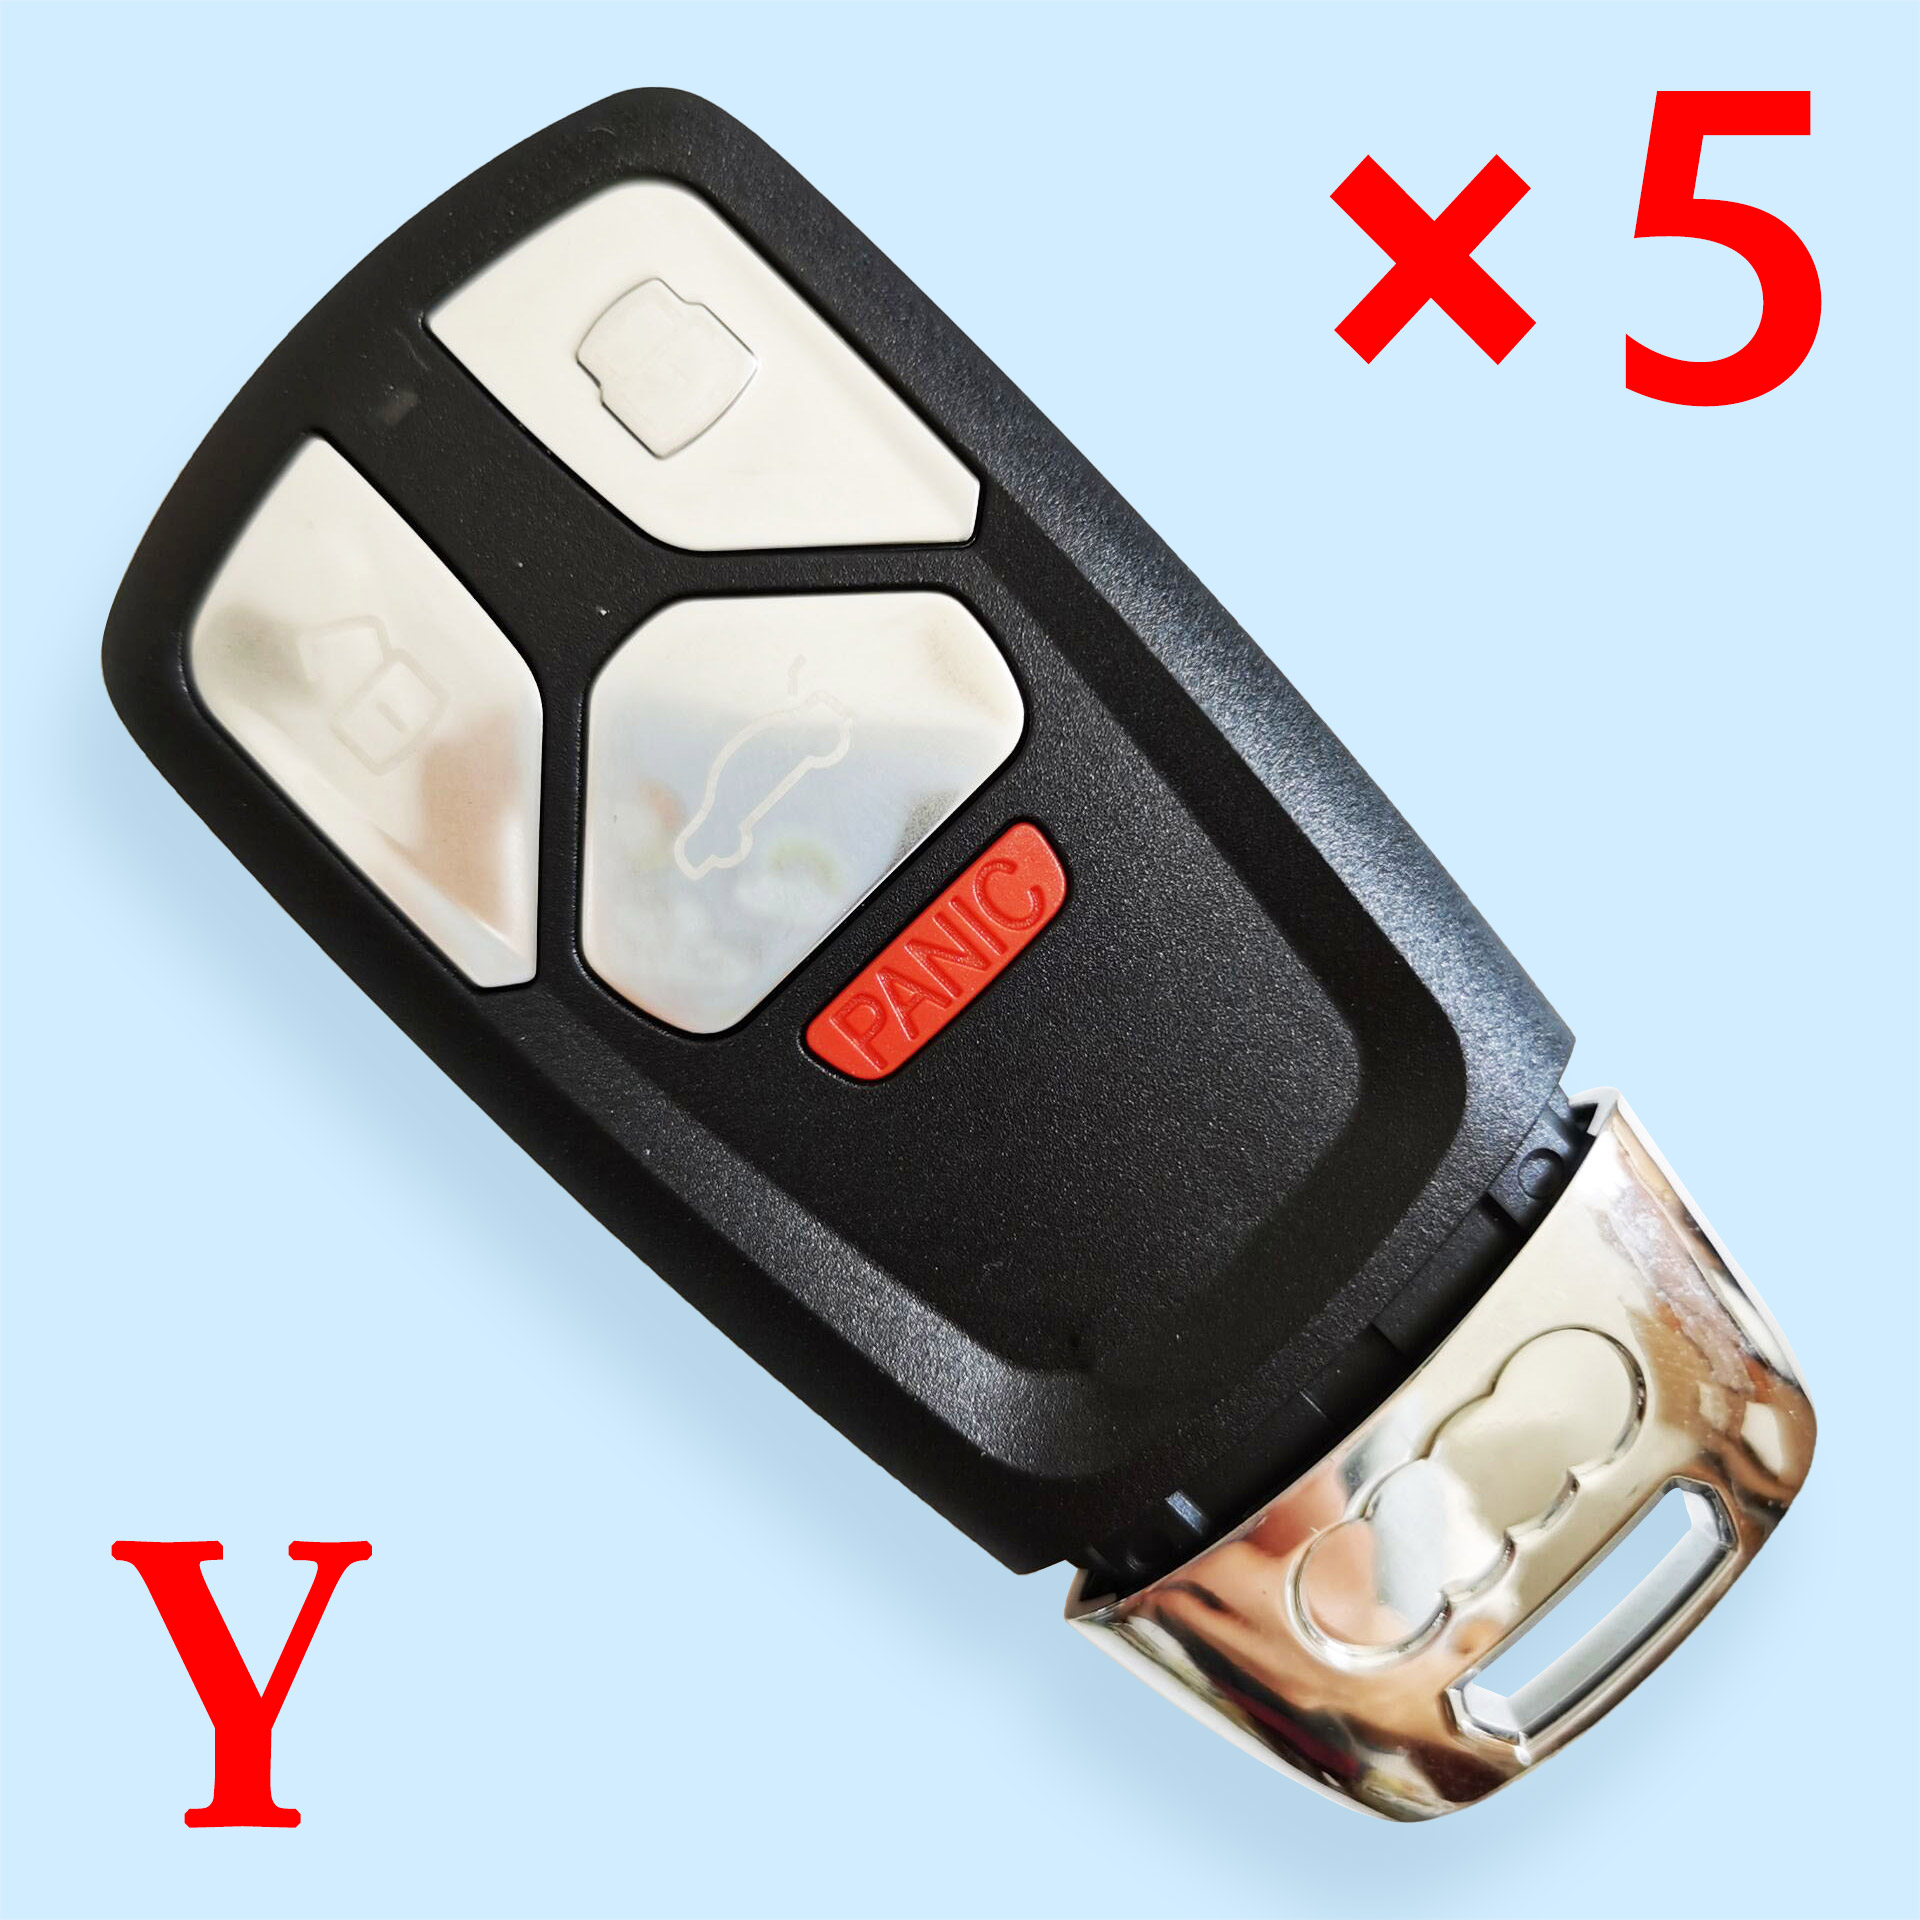 3+1 Buttons Flip Remote Key Shell FOB for Audi TT A4 A5 S4 S5 Q7 SQ7 2017 up - 5 pcs